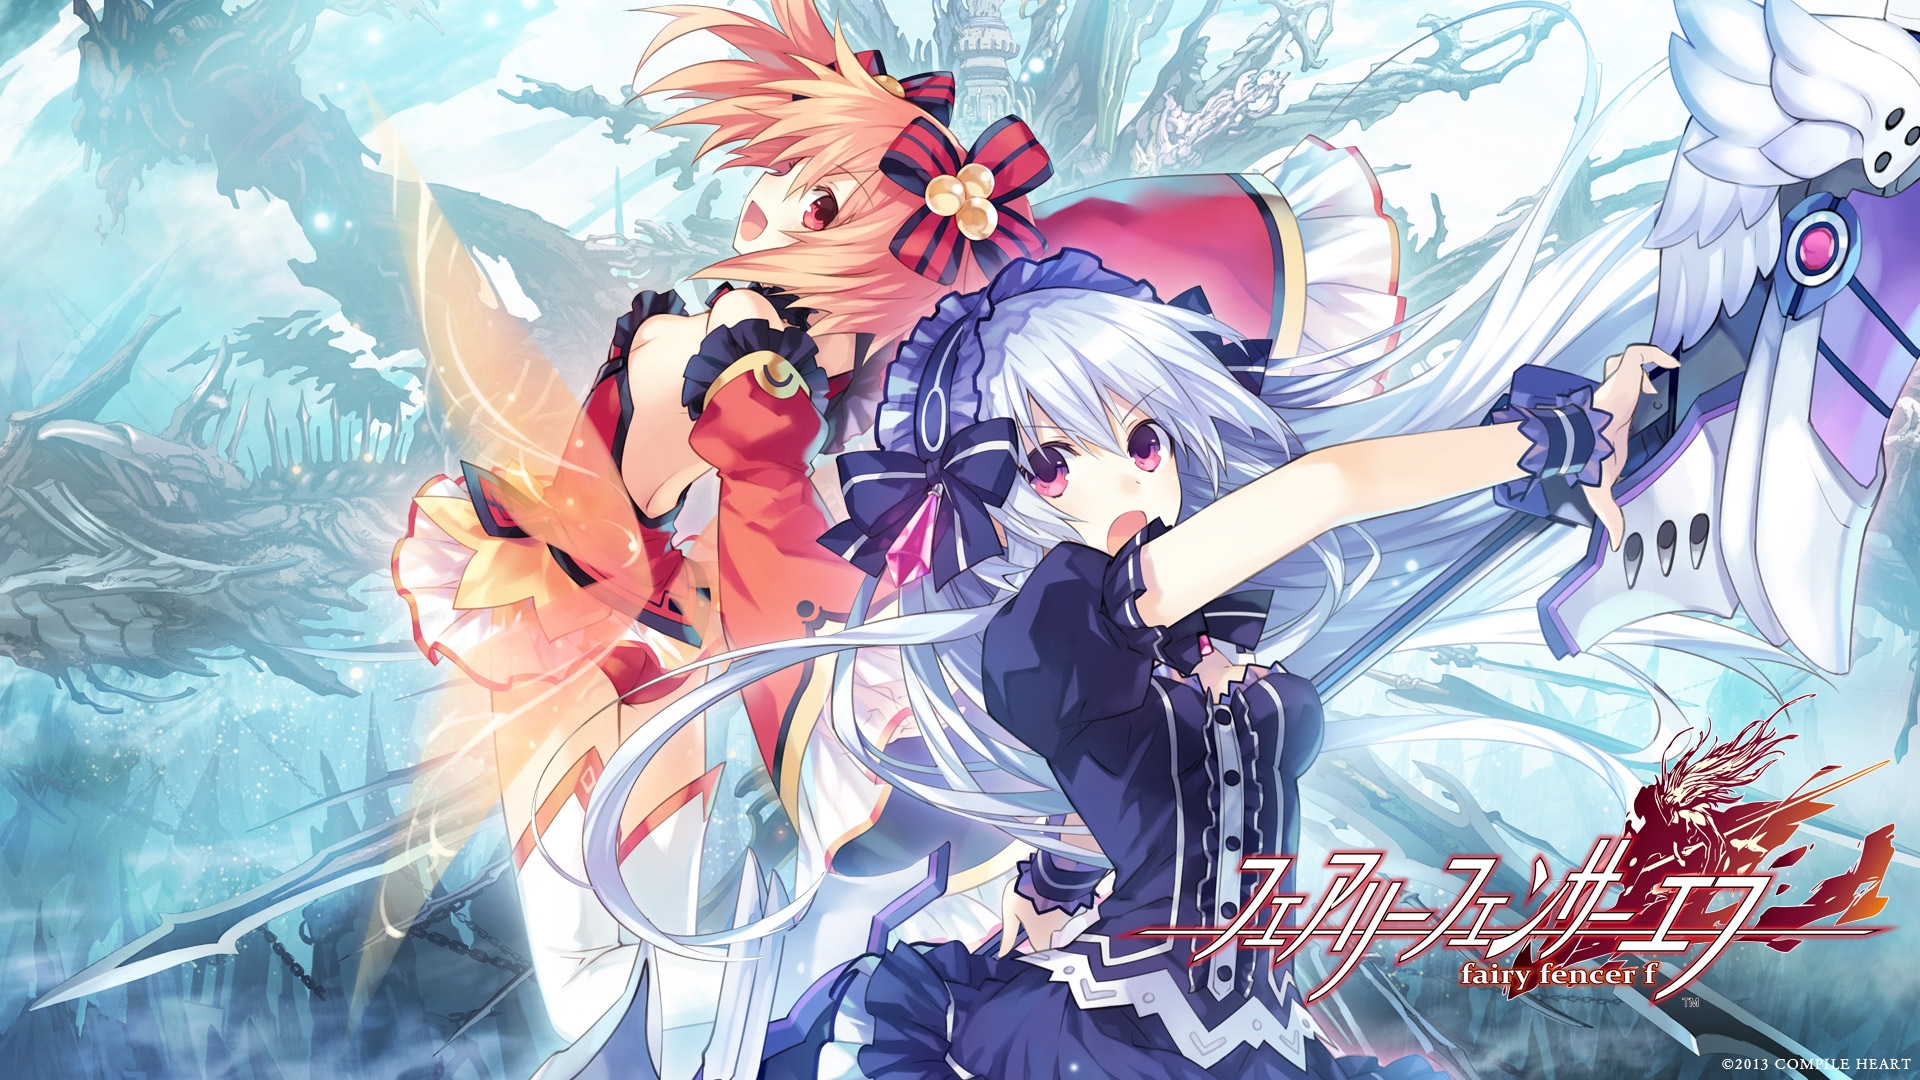 Download 1920x1080 Fairy Fencer F, Jrpg, Anime Style Wallpaper for Widescreen